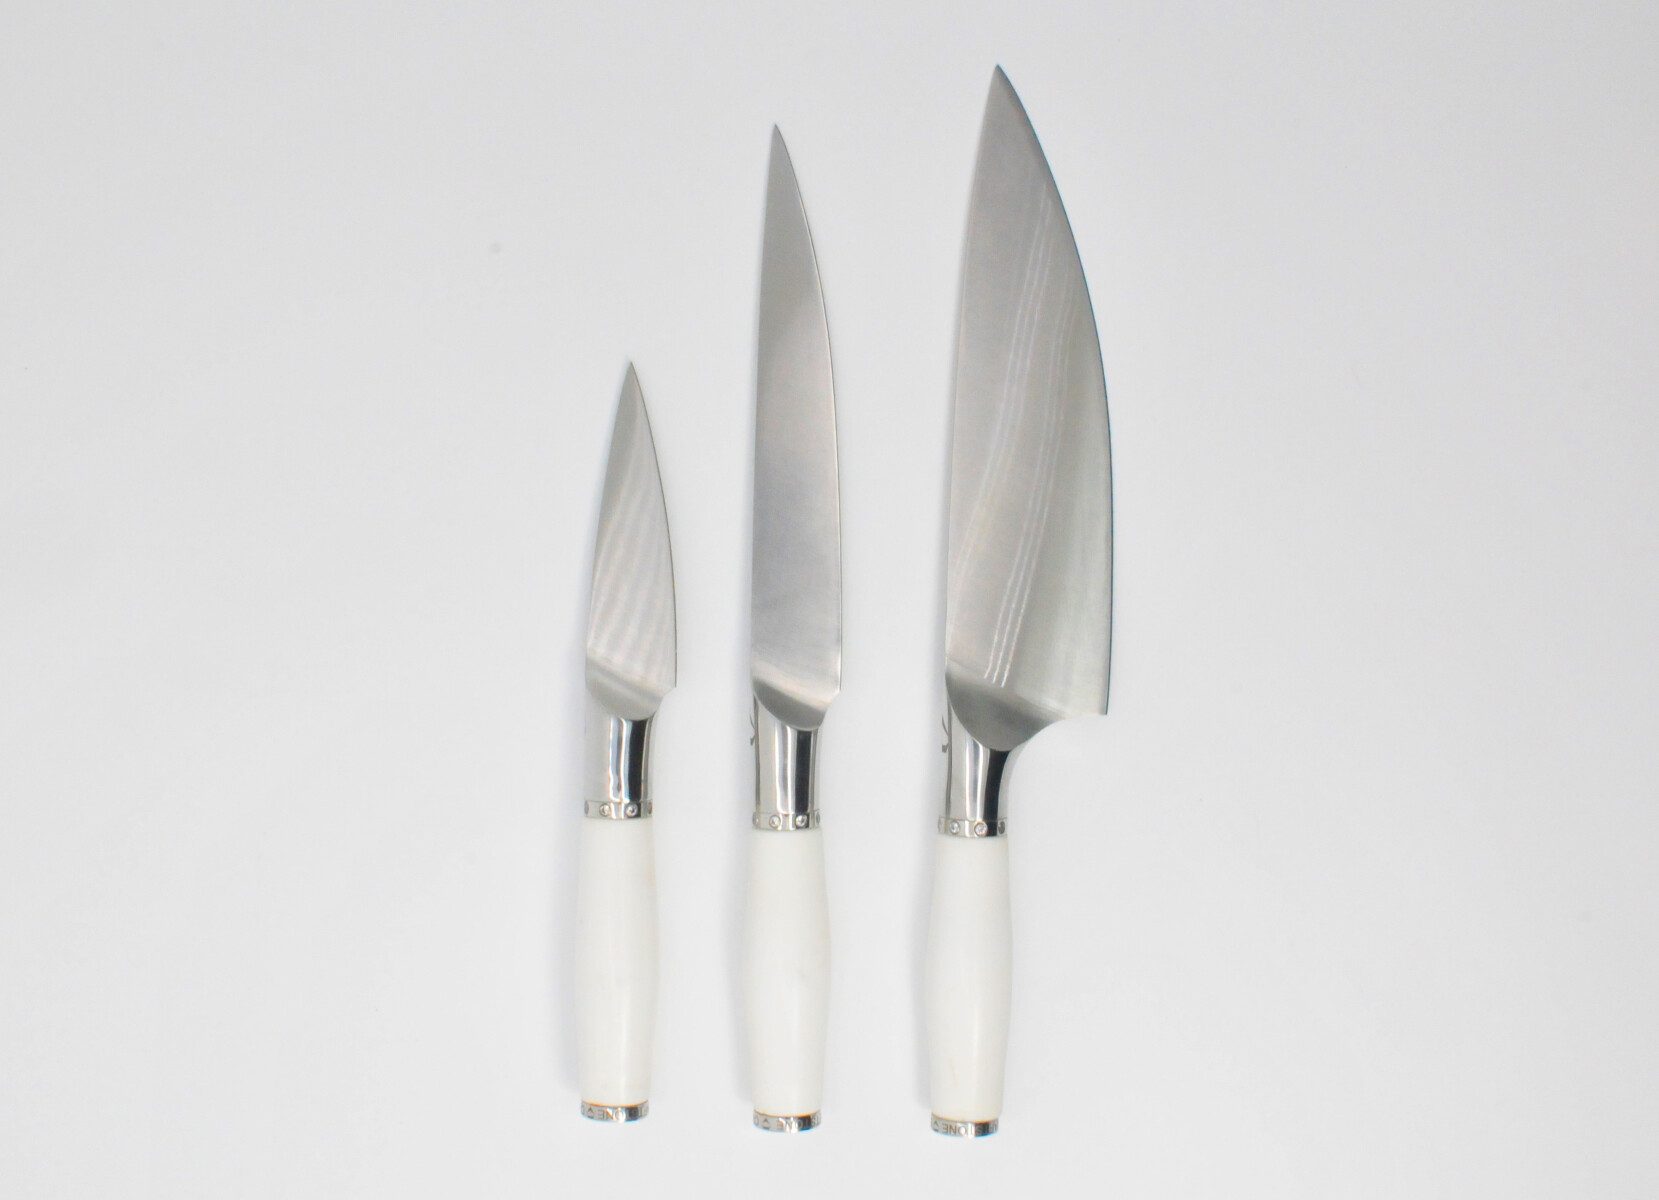 https://www.craftstoneknives.com/wp-content/uploads/bfi_thumb/3-Knife-Set-with-a-Calcutta-White-Marble-Handle-White-Cubic-Zirconia-Stone-at-the-Back-of-the-Knife-White-Cubic-Zirconia-8-Gemstones-Stainless-Steel-Ring-3jbccdykwg8uil1rii5dze.jpg